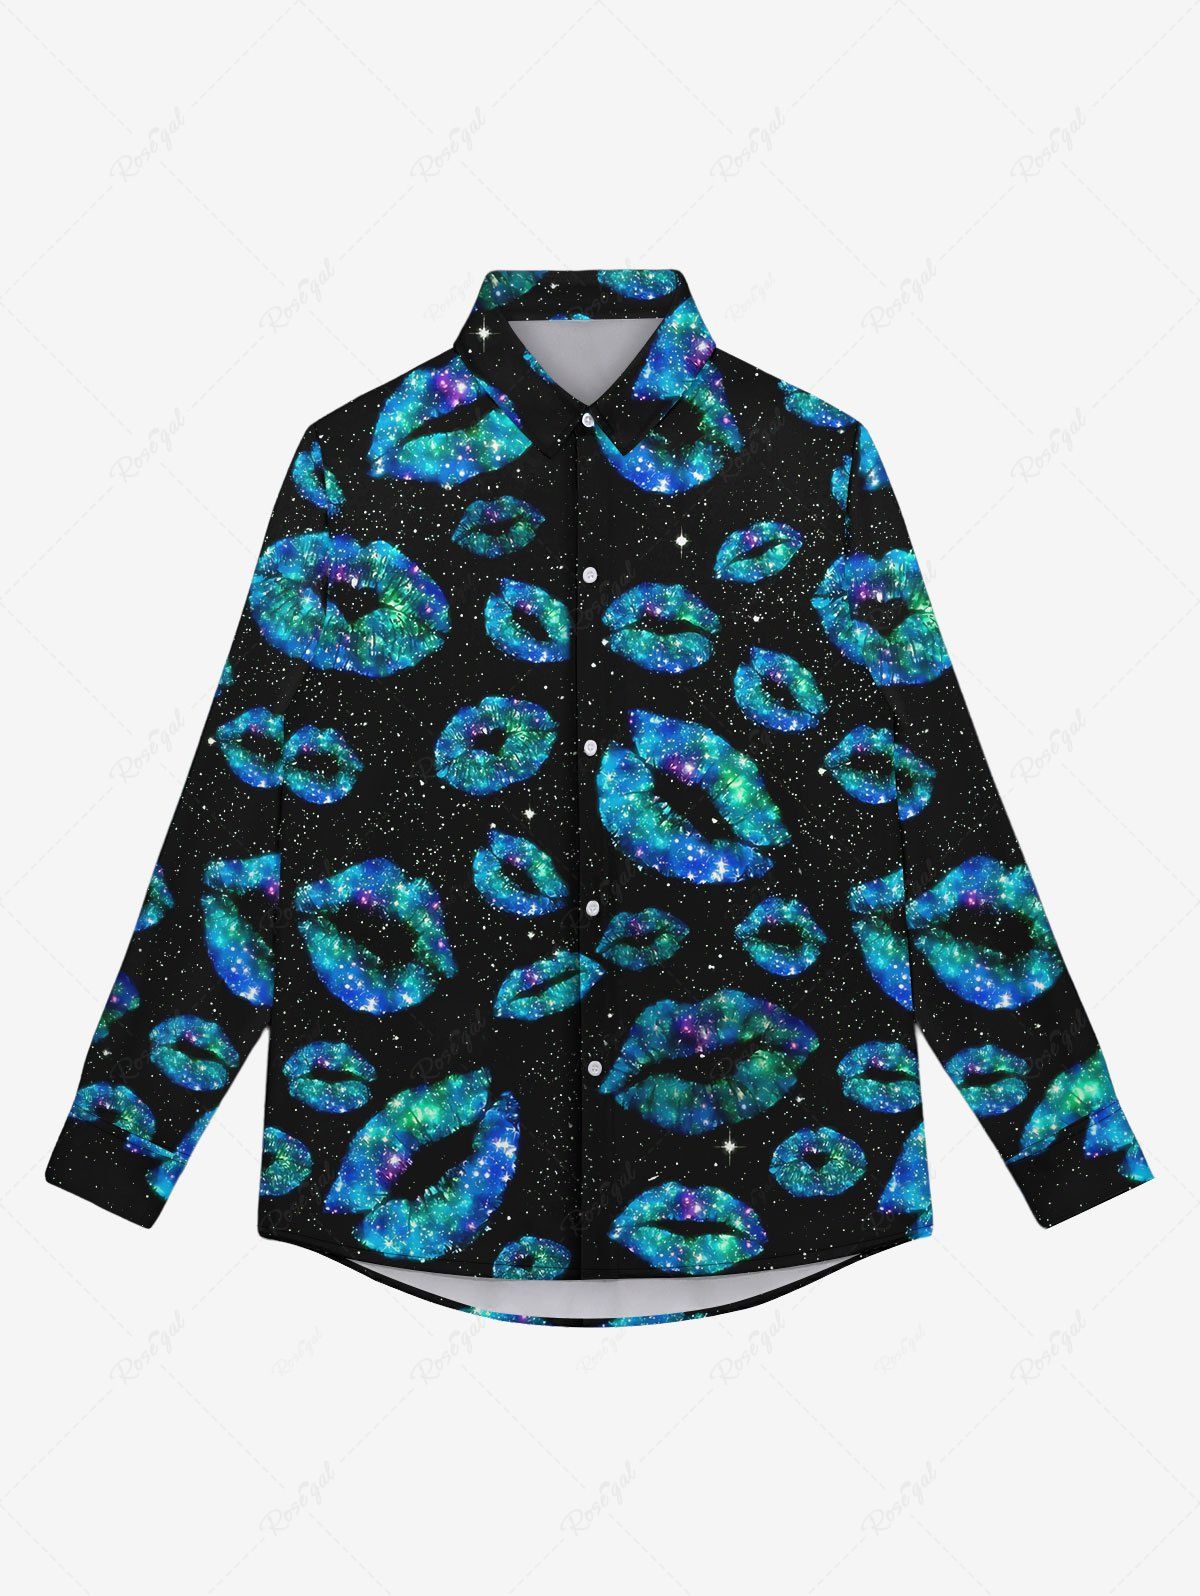 New Gothic Turn-down Collar Glitter Sparkling Lip Galaxy Printed Buttons Shirt For Men  